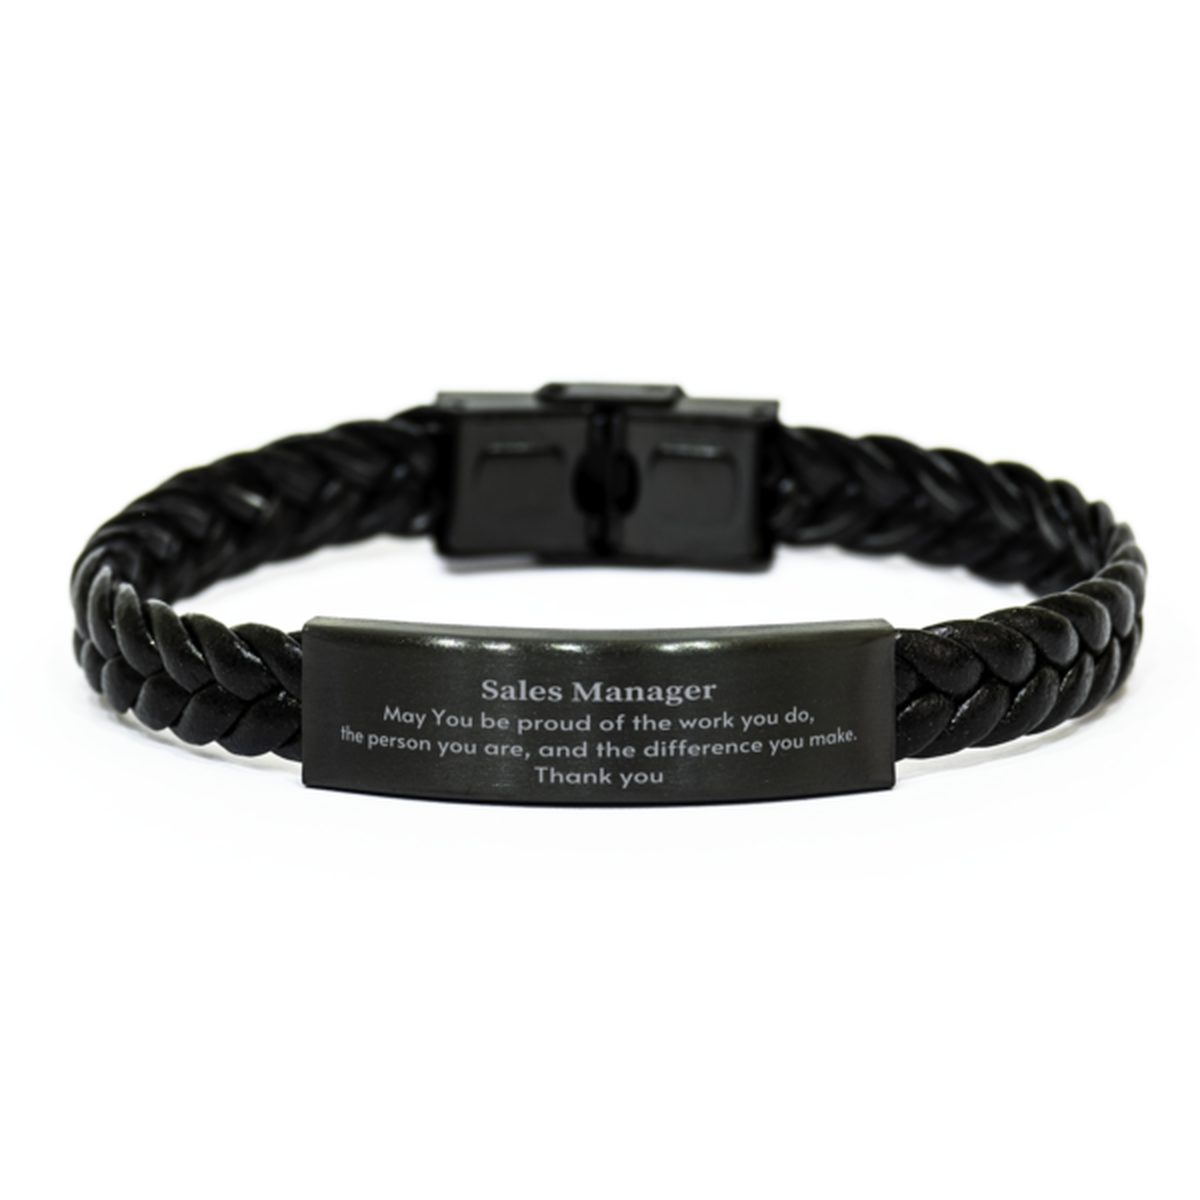 Heartwarming Braided Leather Bracelet Retirement Coworkers Gifts for Sales Manager, Sales Manager May You be proud of the work you do, the person you are Gifts for Boss Men Women Friends